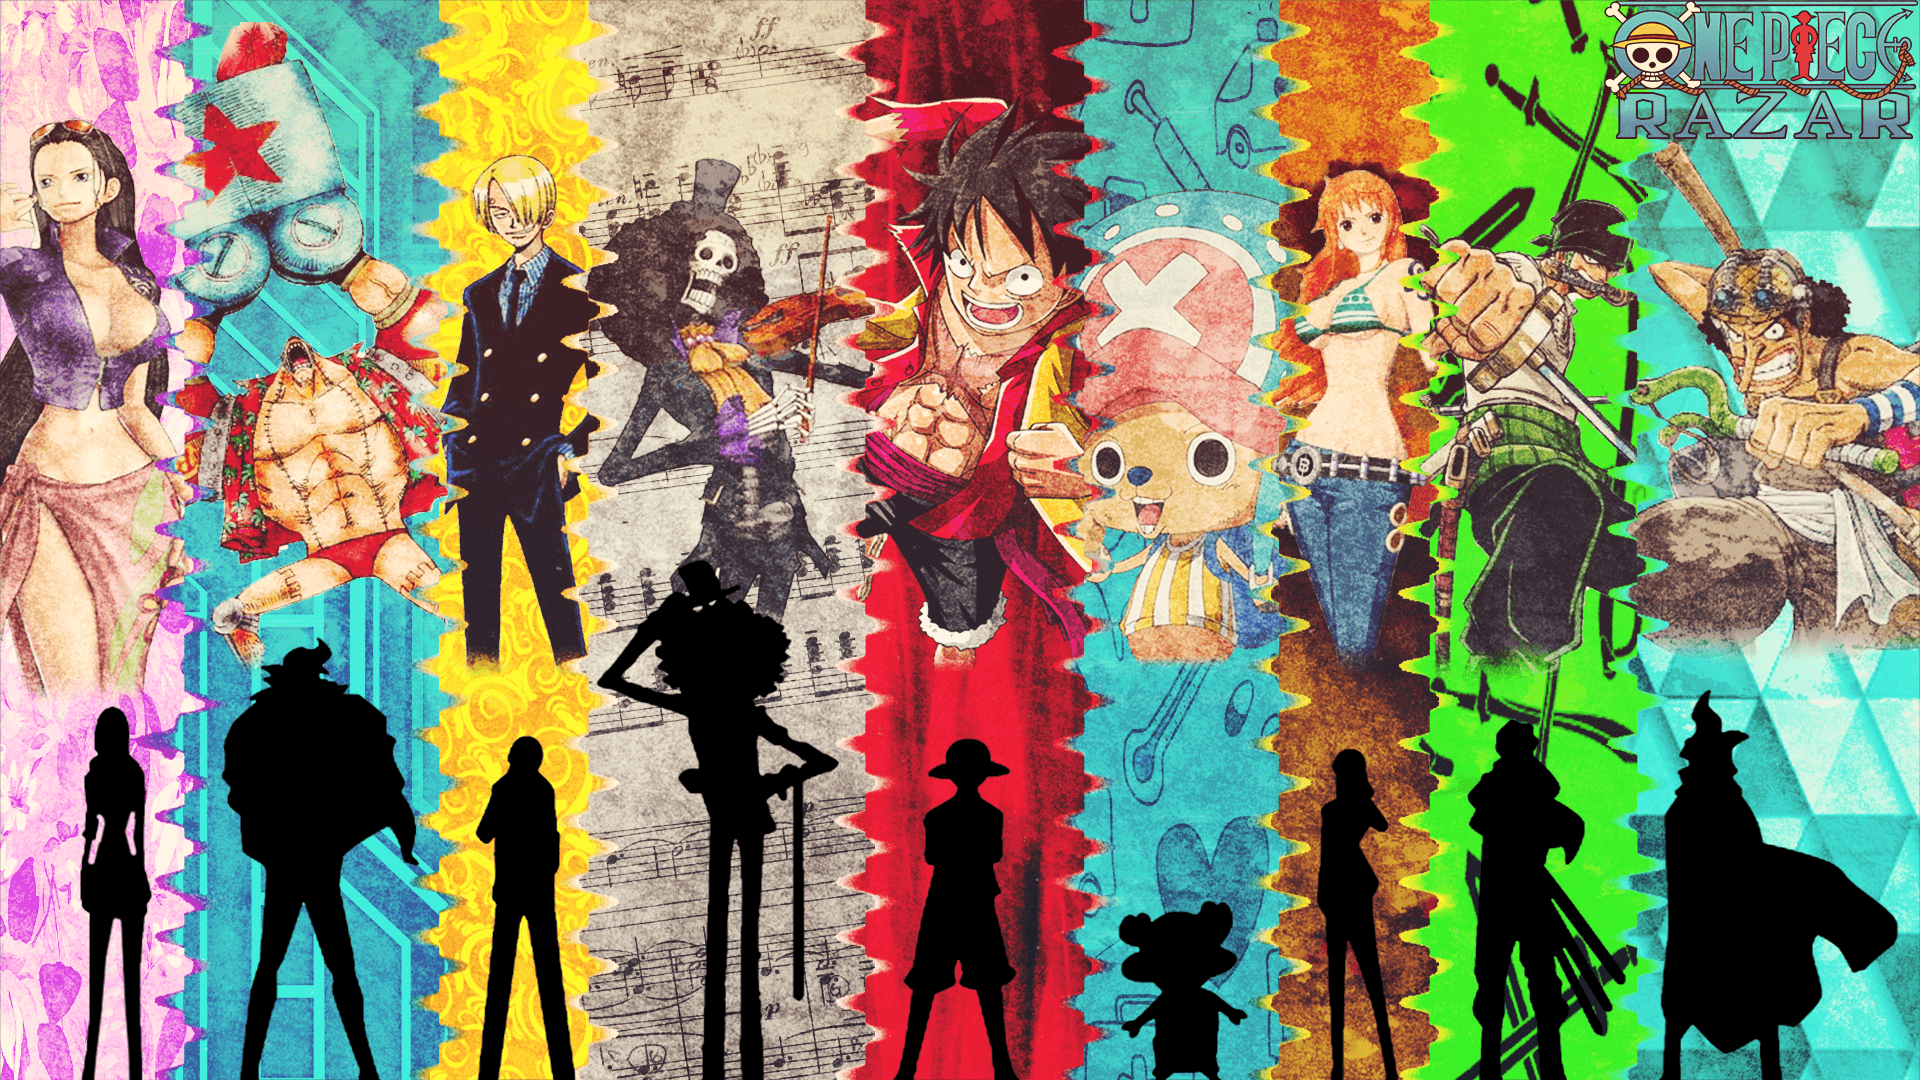 62+ One Piece Wallpapers: HD, 4K, 5K for PC and Mobile | Download free  images for iPhone, Android